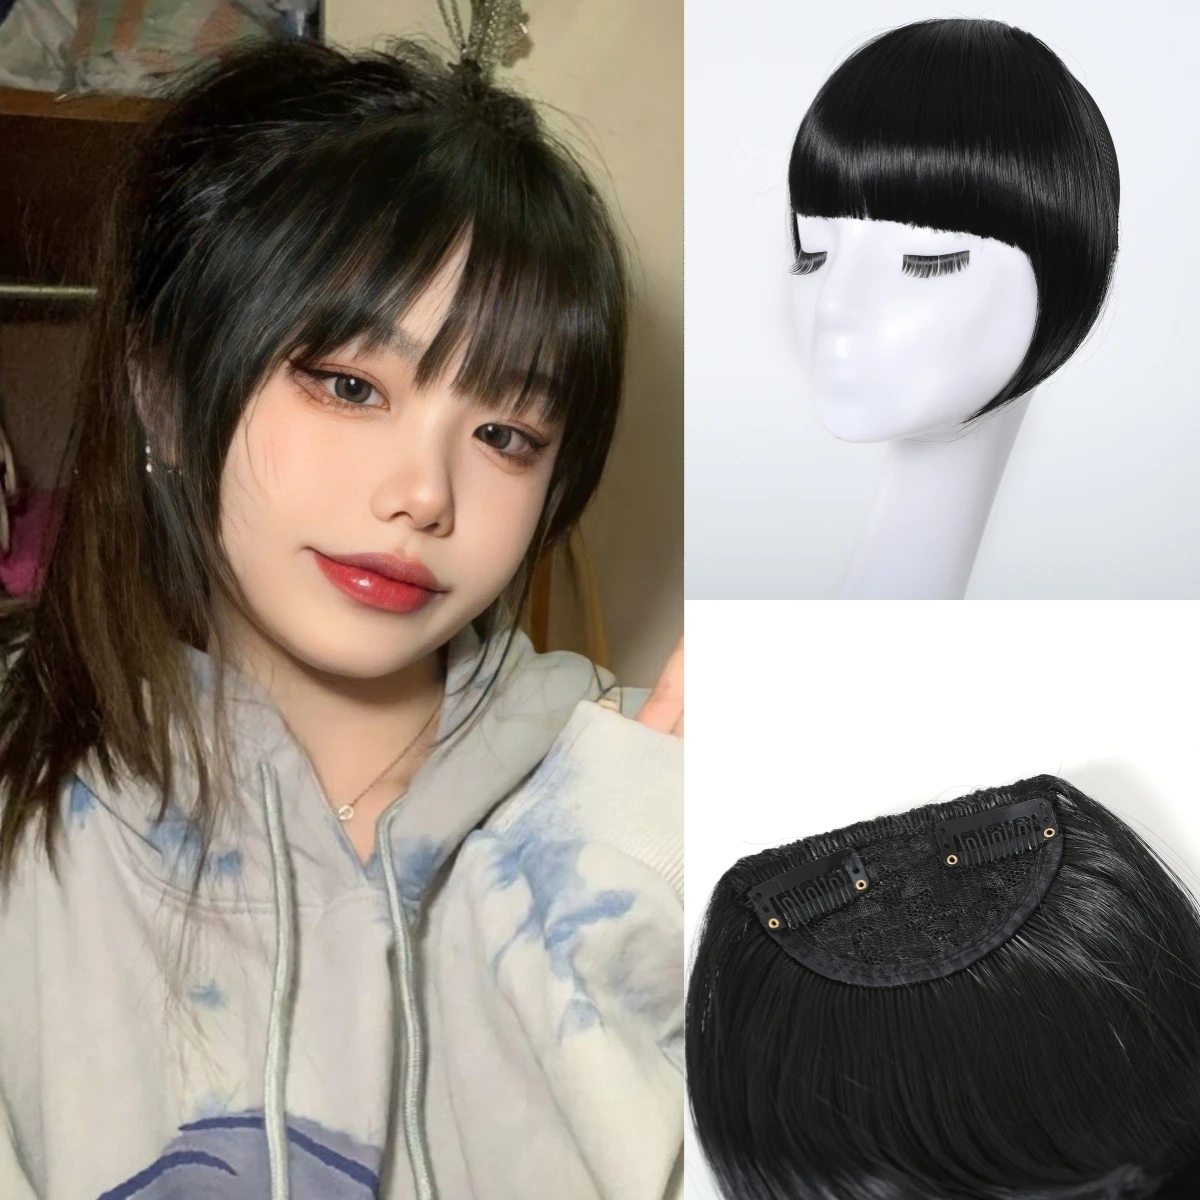 2PCS Black Synthetic Bangs for Women Natural Soft Thickening Fake Hair Extension Accessories Heat Resistant Clip Bang Hairpieces 2pcs lot black hair sticker heart bowknot shape clip bangs fixed magic paste posts magic tape fringe hair accessories for women